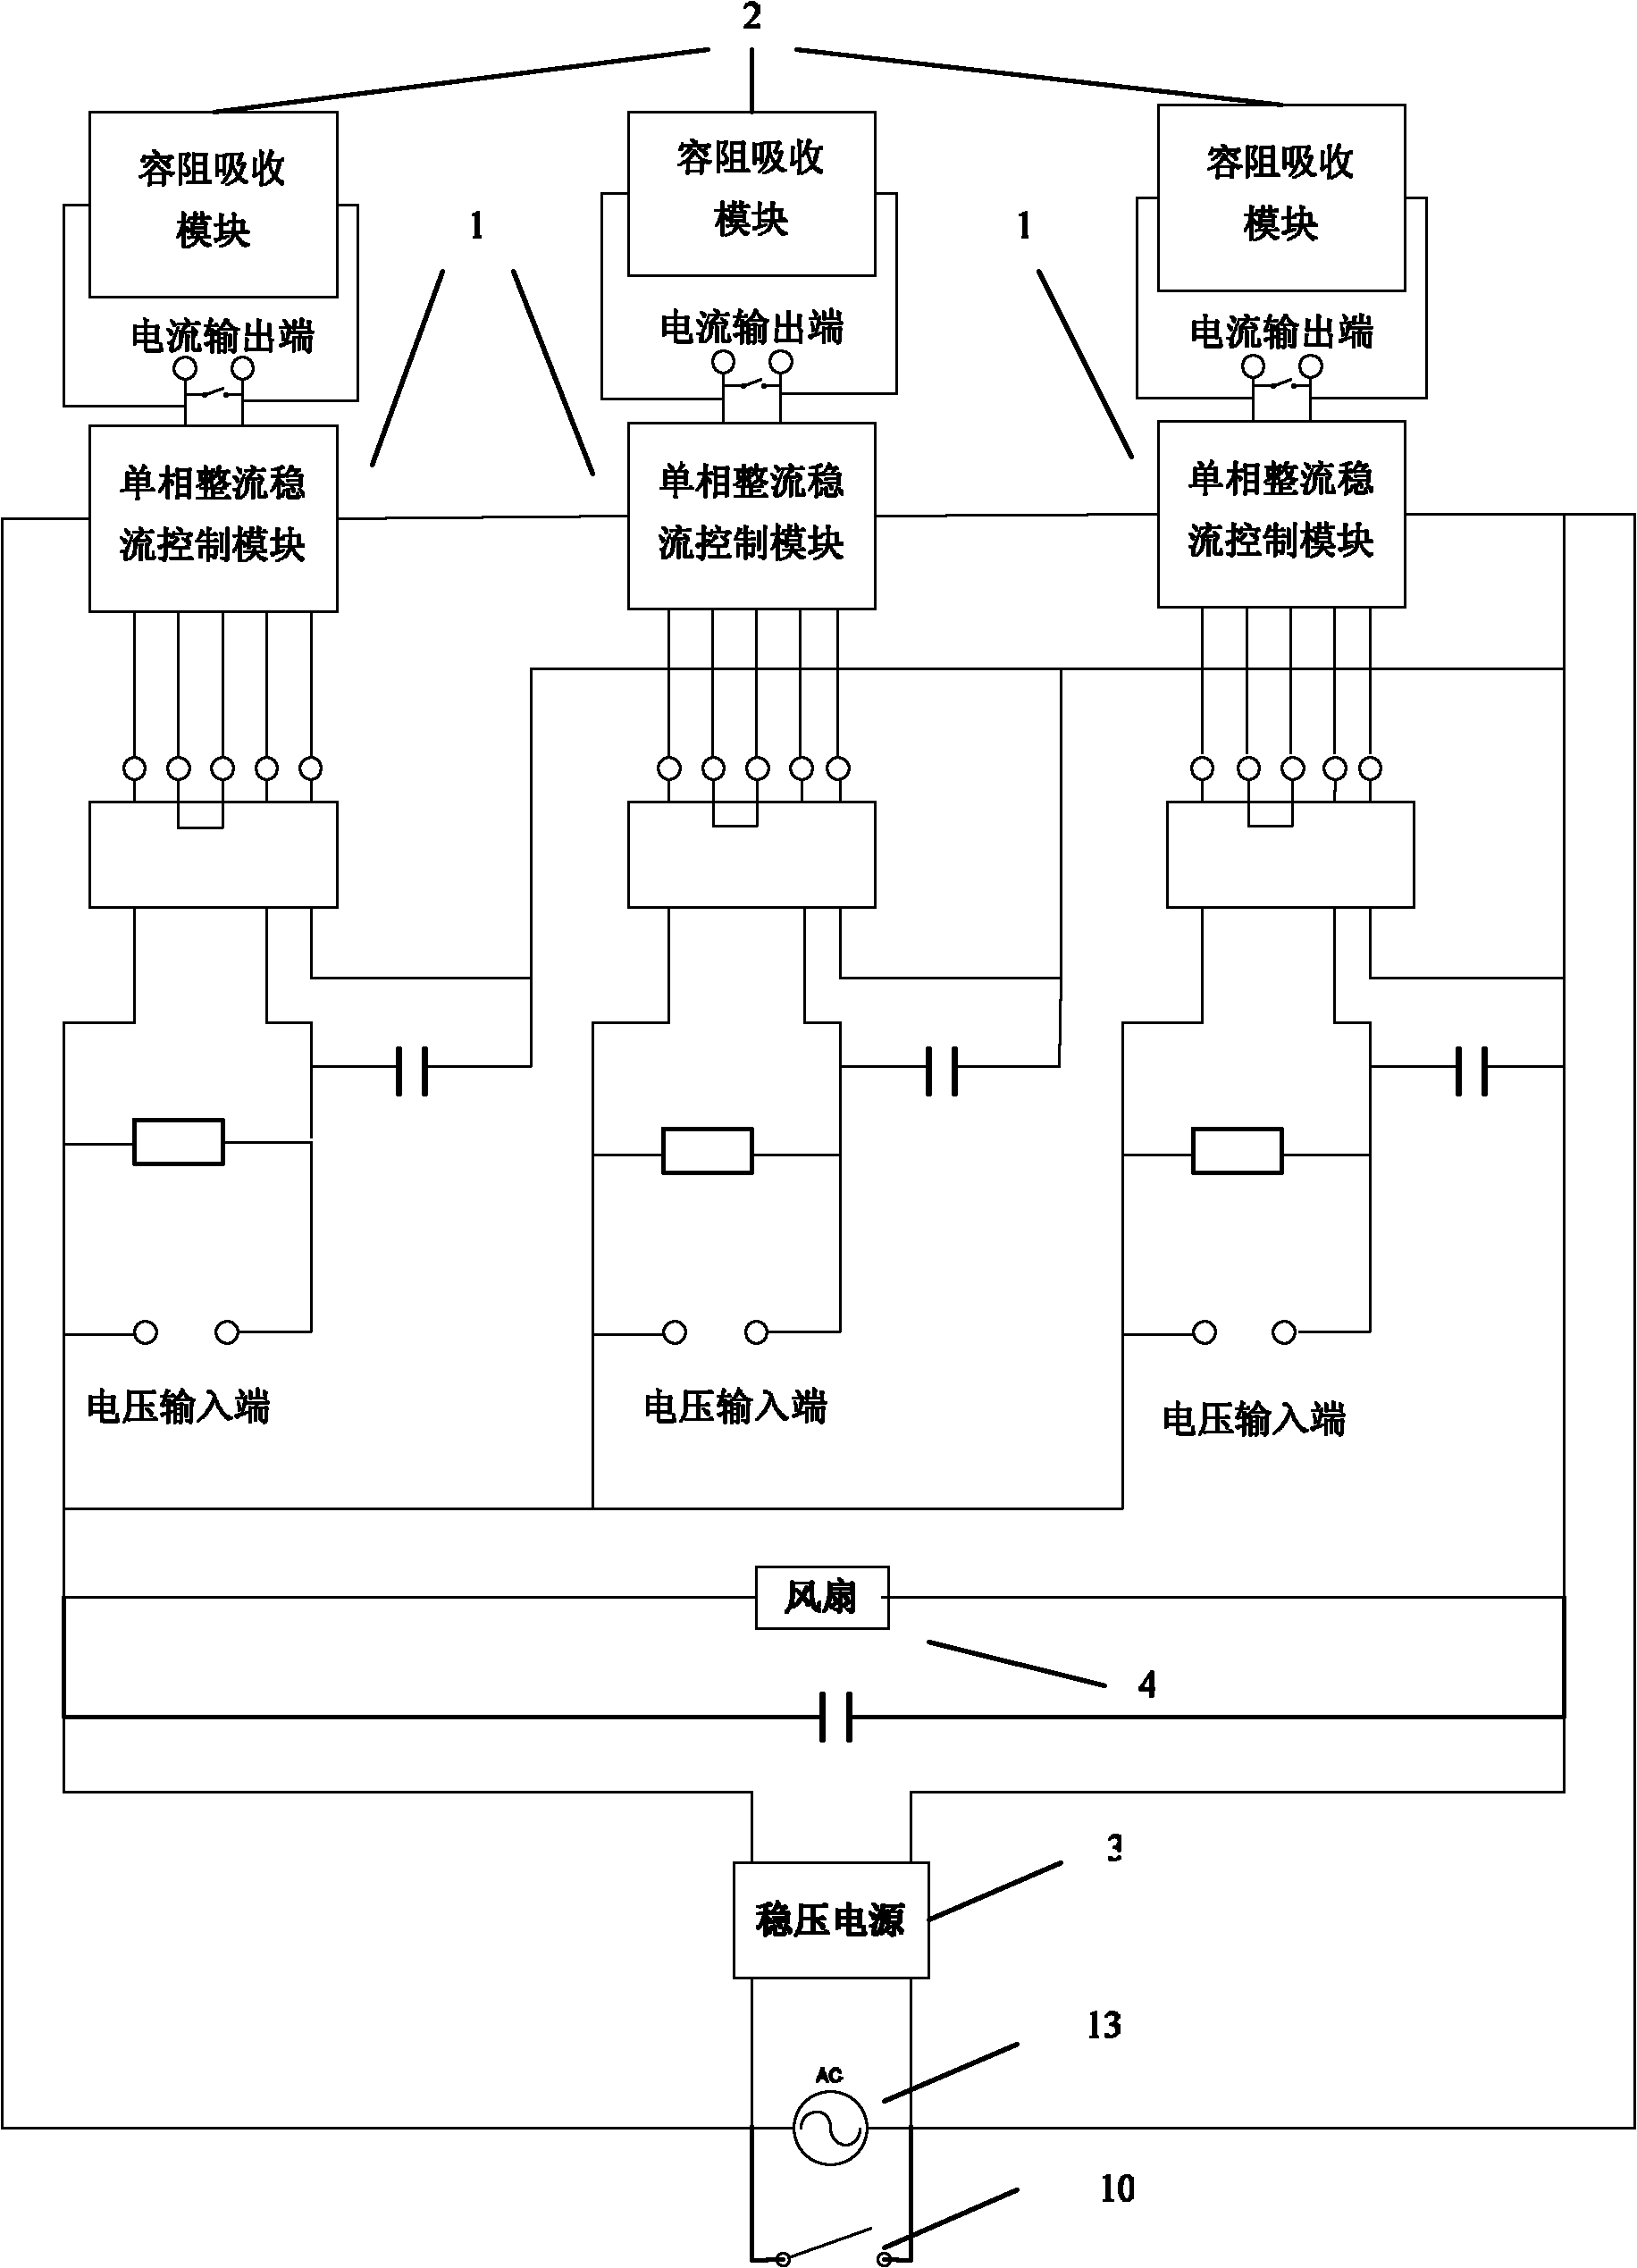 Active control drive power supply for shape memory alloy